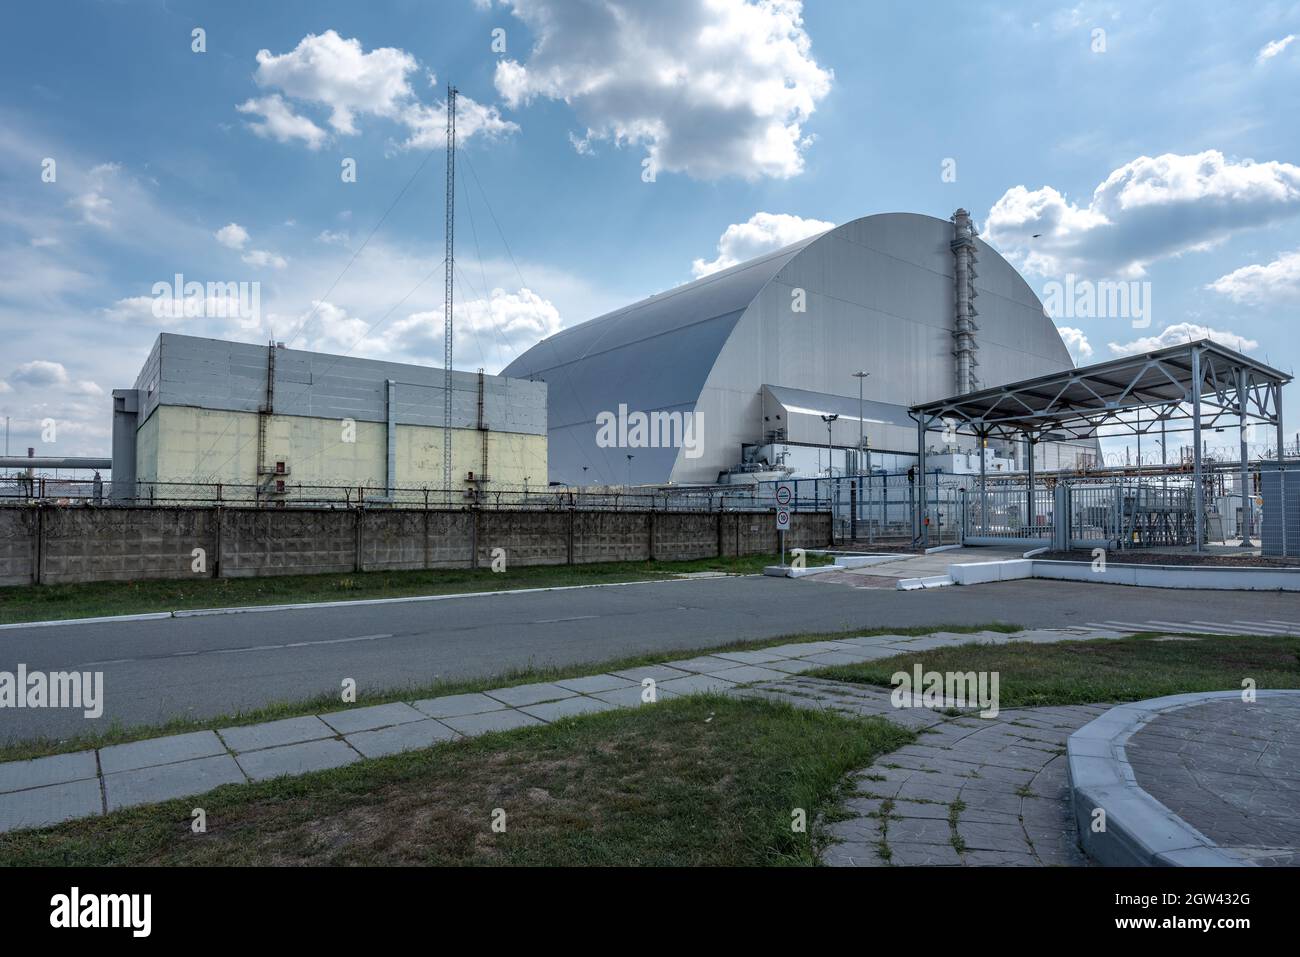 New Safe Confinement (Sarcophagus) at Reactor 4 of Chernobyl Nuclear Power Plant - the place of 1986 disaster - Chernobyl Exclusion Zone, Ukraine Stock Photo